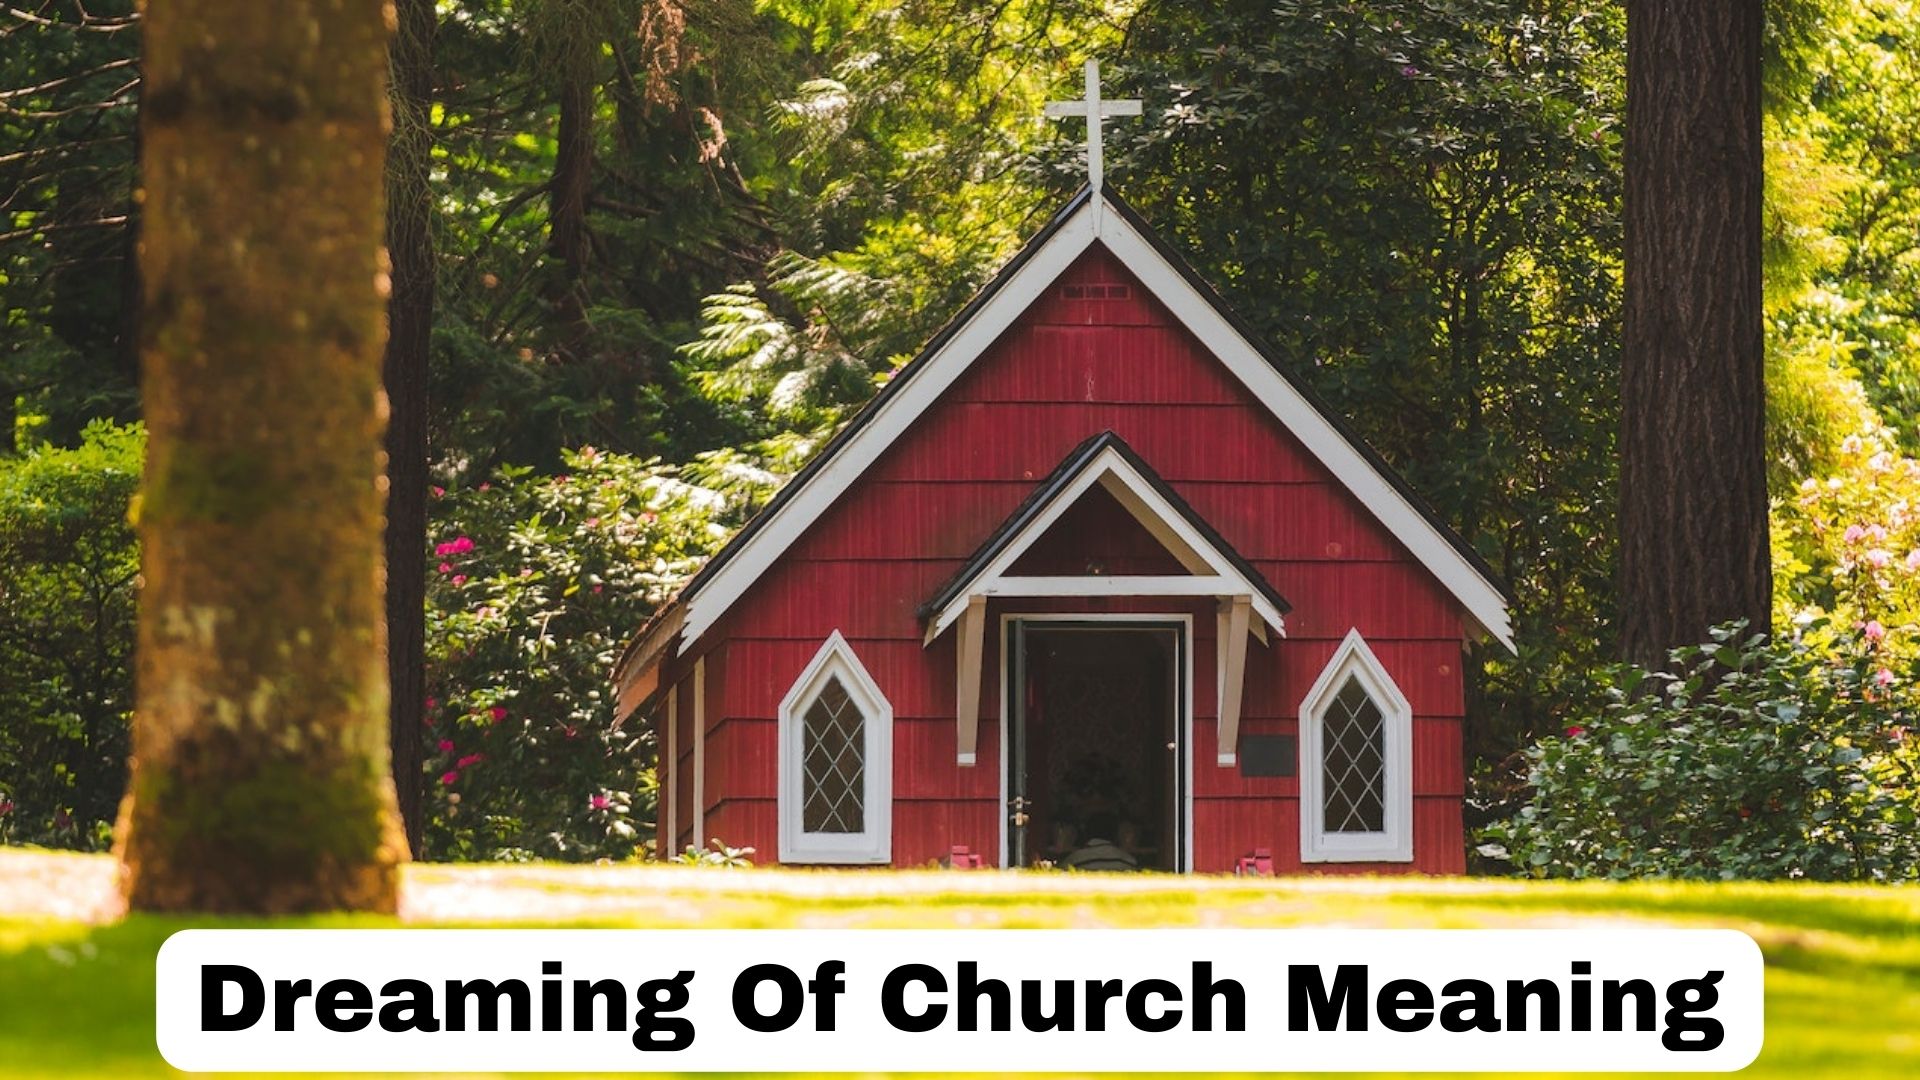 Dreaming Of Church Meaning - Support From A Higher Power